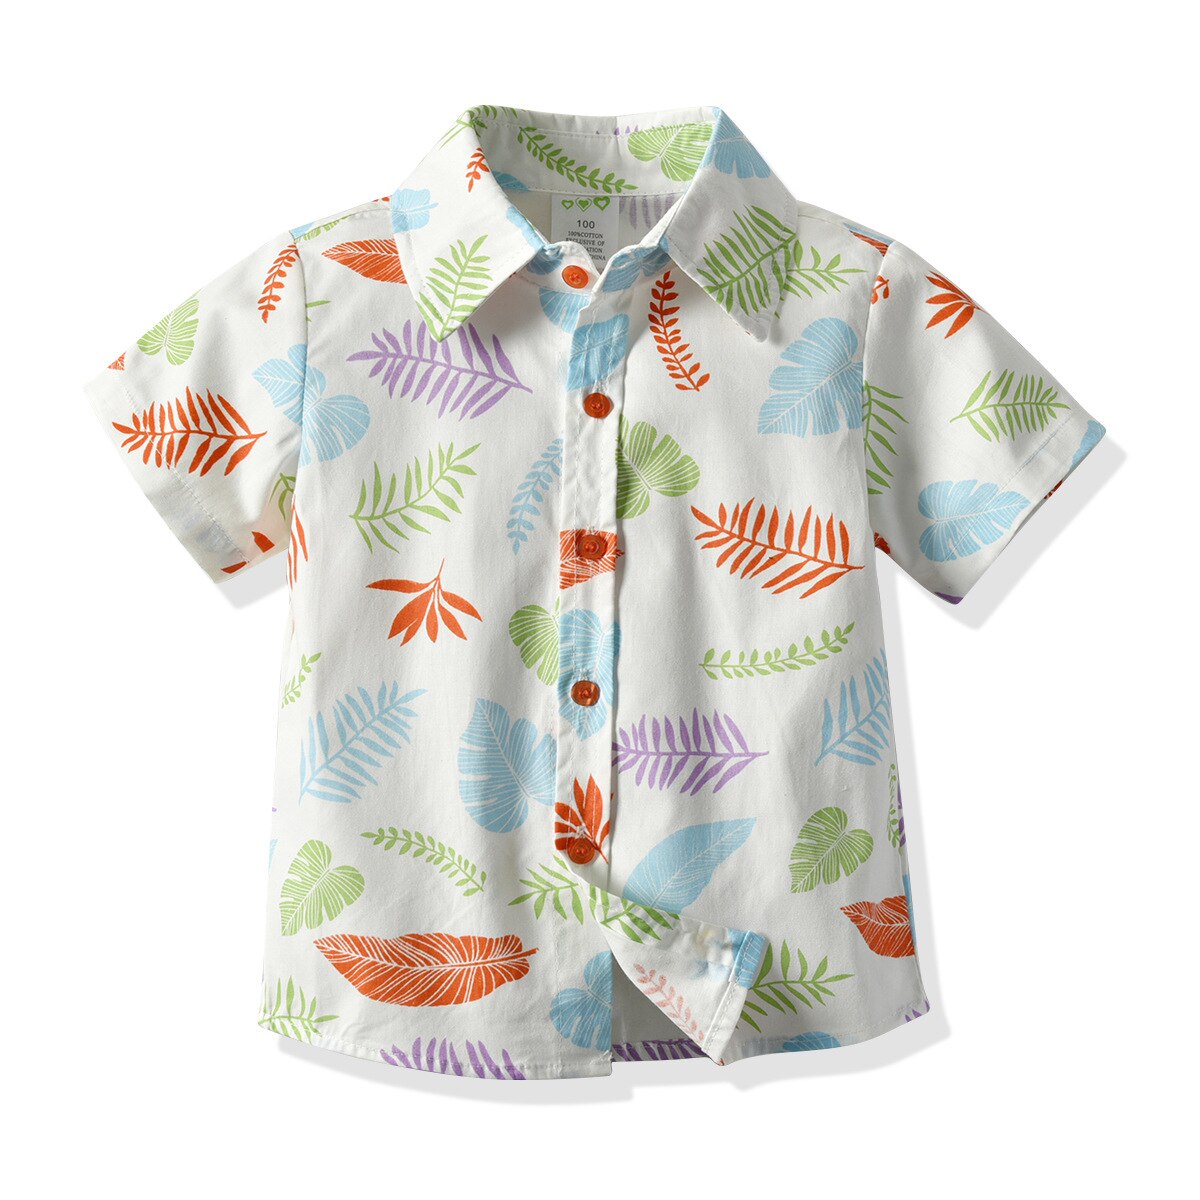 Summer Infant Boys Shirt Colorful Leaves Printing Short Sleeve Lapel Single-breasted Top Children Casual Clothes: 3T